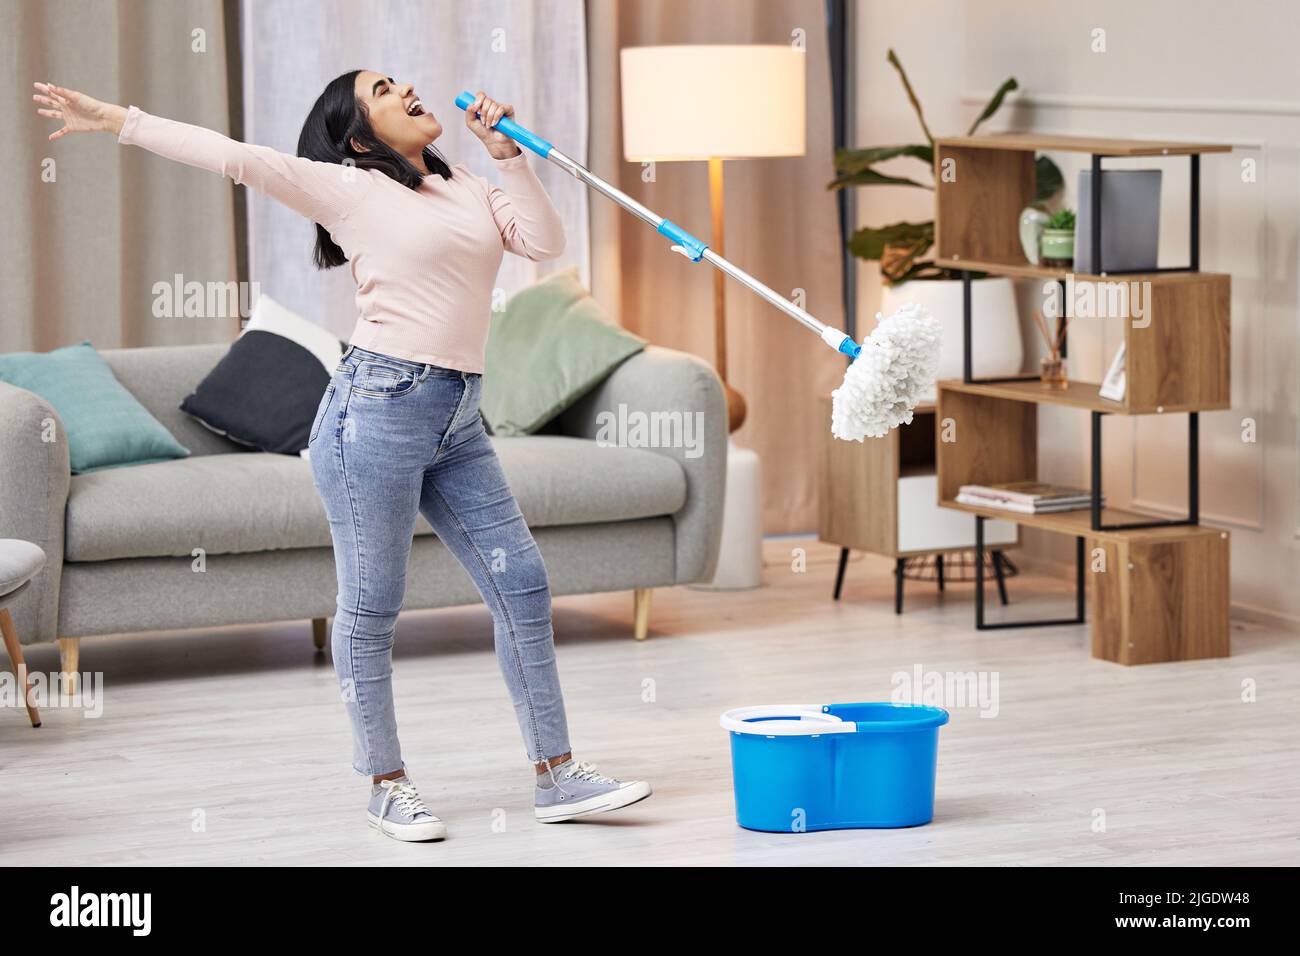 Time for my solo. a young woman singing while mopping the floors at home. Stock Photo